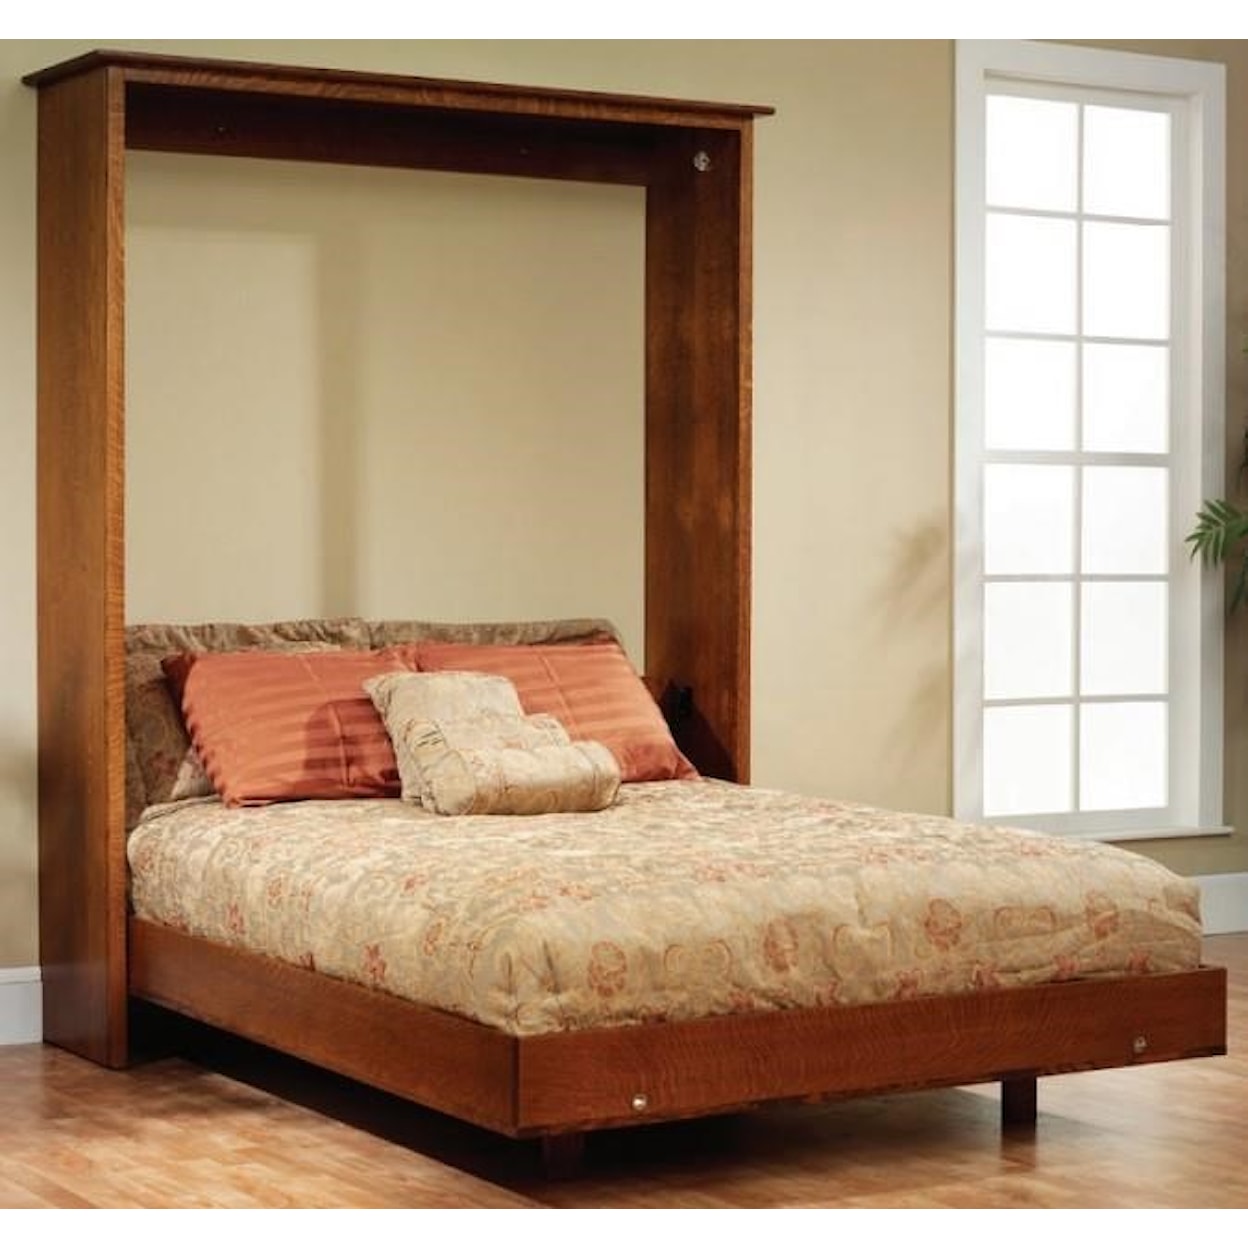 Millcraft Old English Mission Queen Murphy Bed